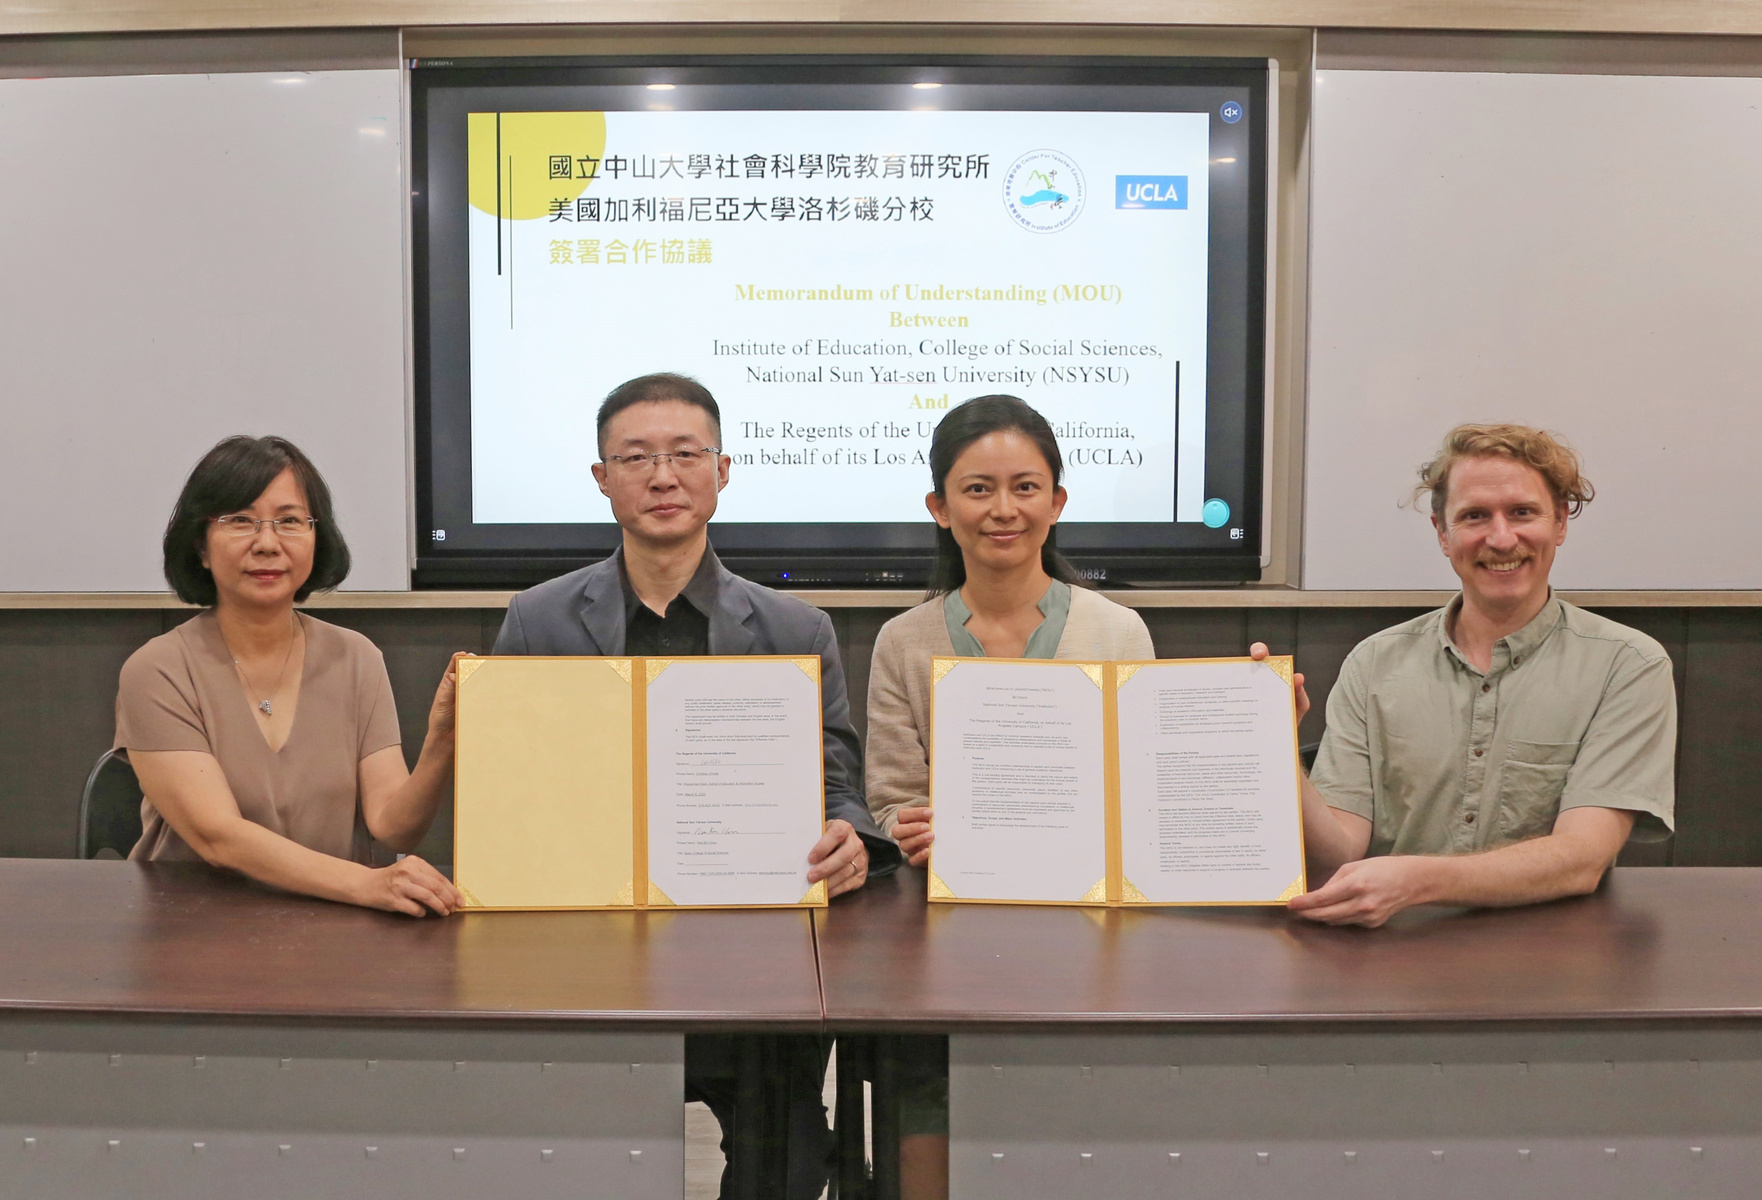 The College of Social Sciences at NSYSU has signed an MOU for transnational academic exchange and cooperation with the School of Education & Information Studies at UCLA. From the left of the photo are Hsueh-Hua Chuang, Program Chair of the International Graduate Program of Education and Human Development at NSYSU, Wen-Bin Chiou, then dean of the College of Social Sciences, Paichi Pat Shein, Chair of the Institute of Education, and Dale Albanese, Assistant Professor of the International Graduate Program of Education and Human Development.